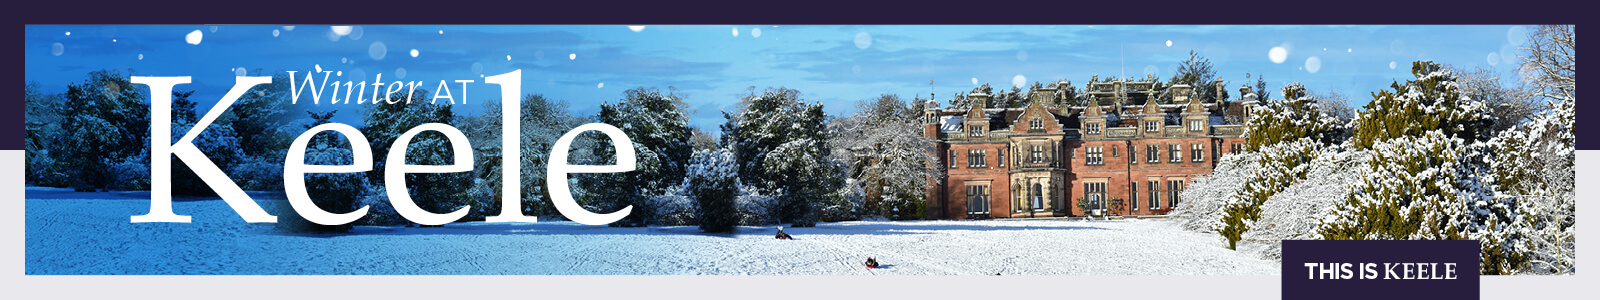 Winter at Keele